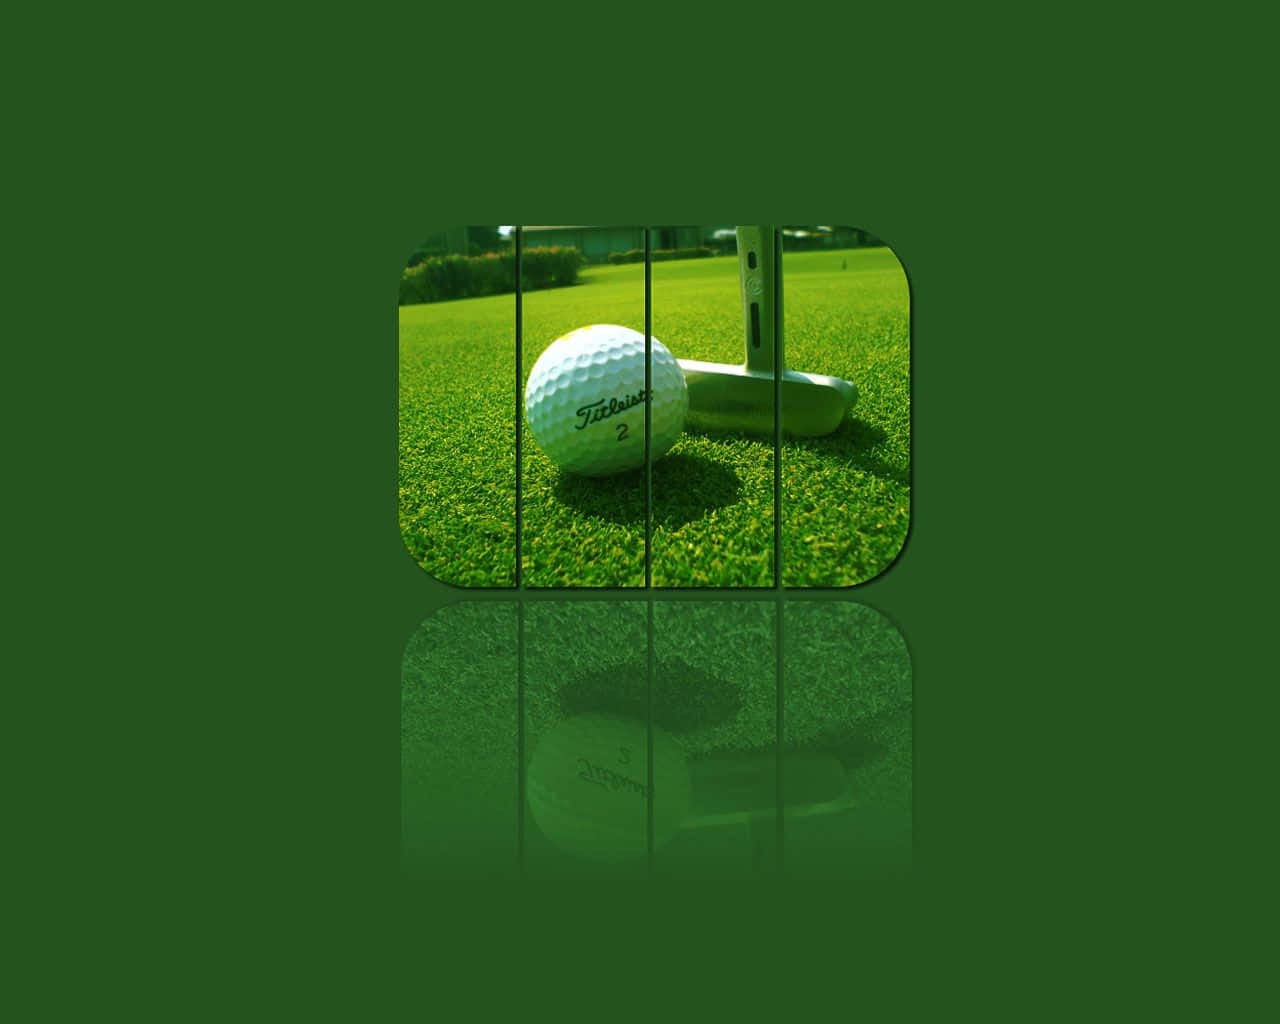 Sink the Birdie at Awesome Golf Wallpaper